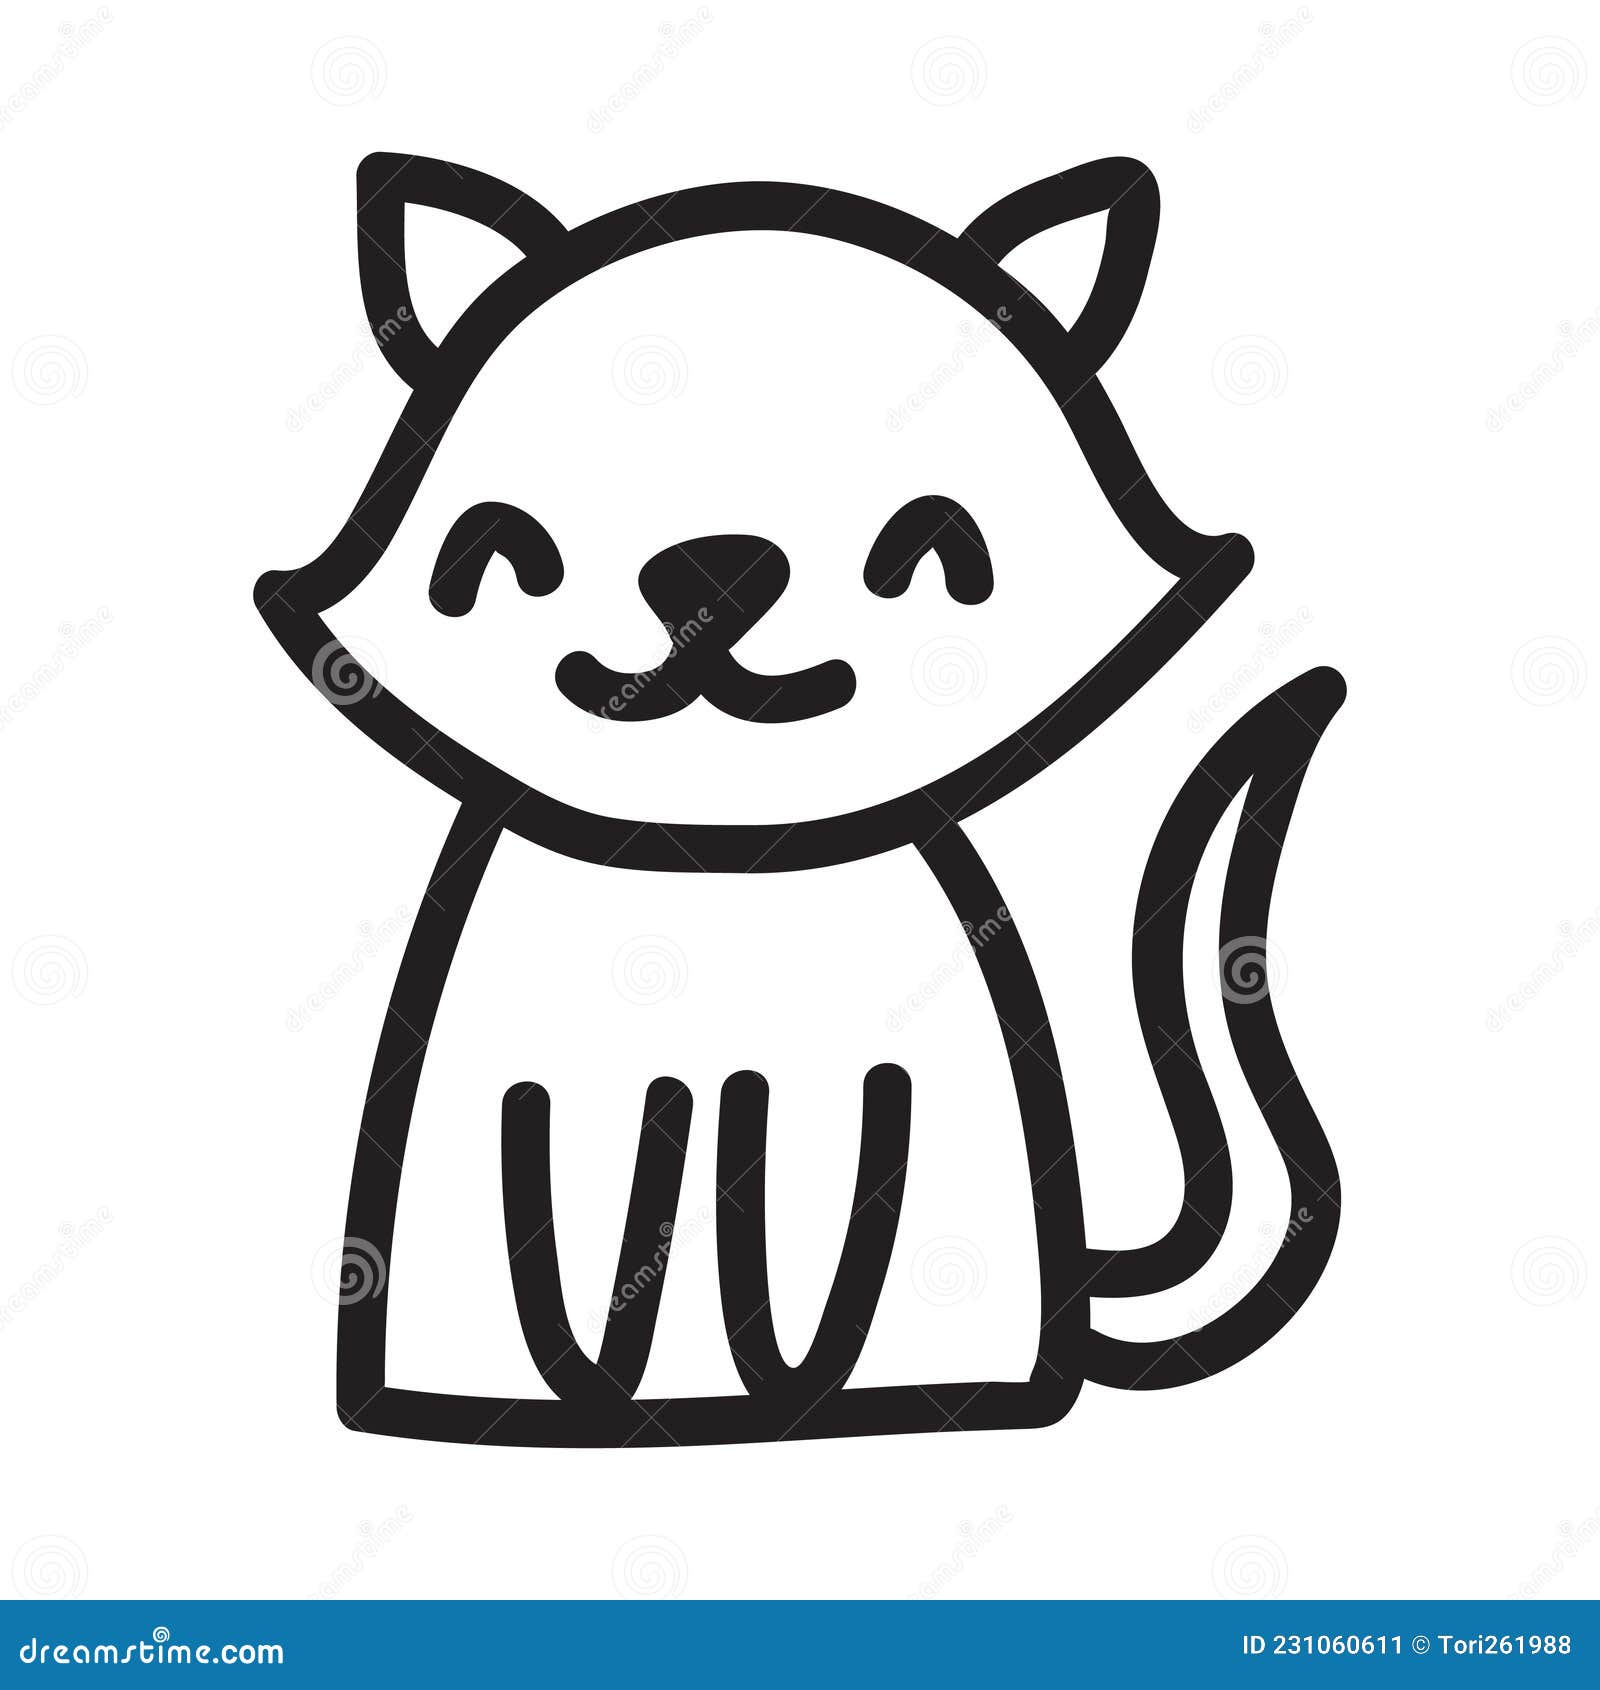 57,894 Simple Cat Drawing Images, Stock Photos & Vectors | Shutterstock